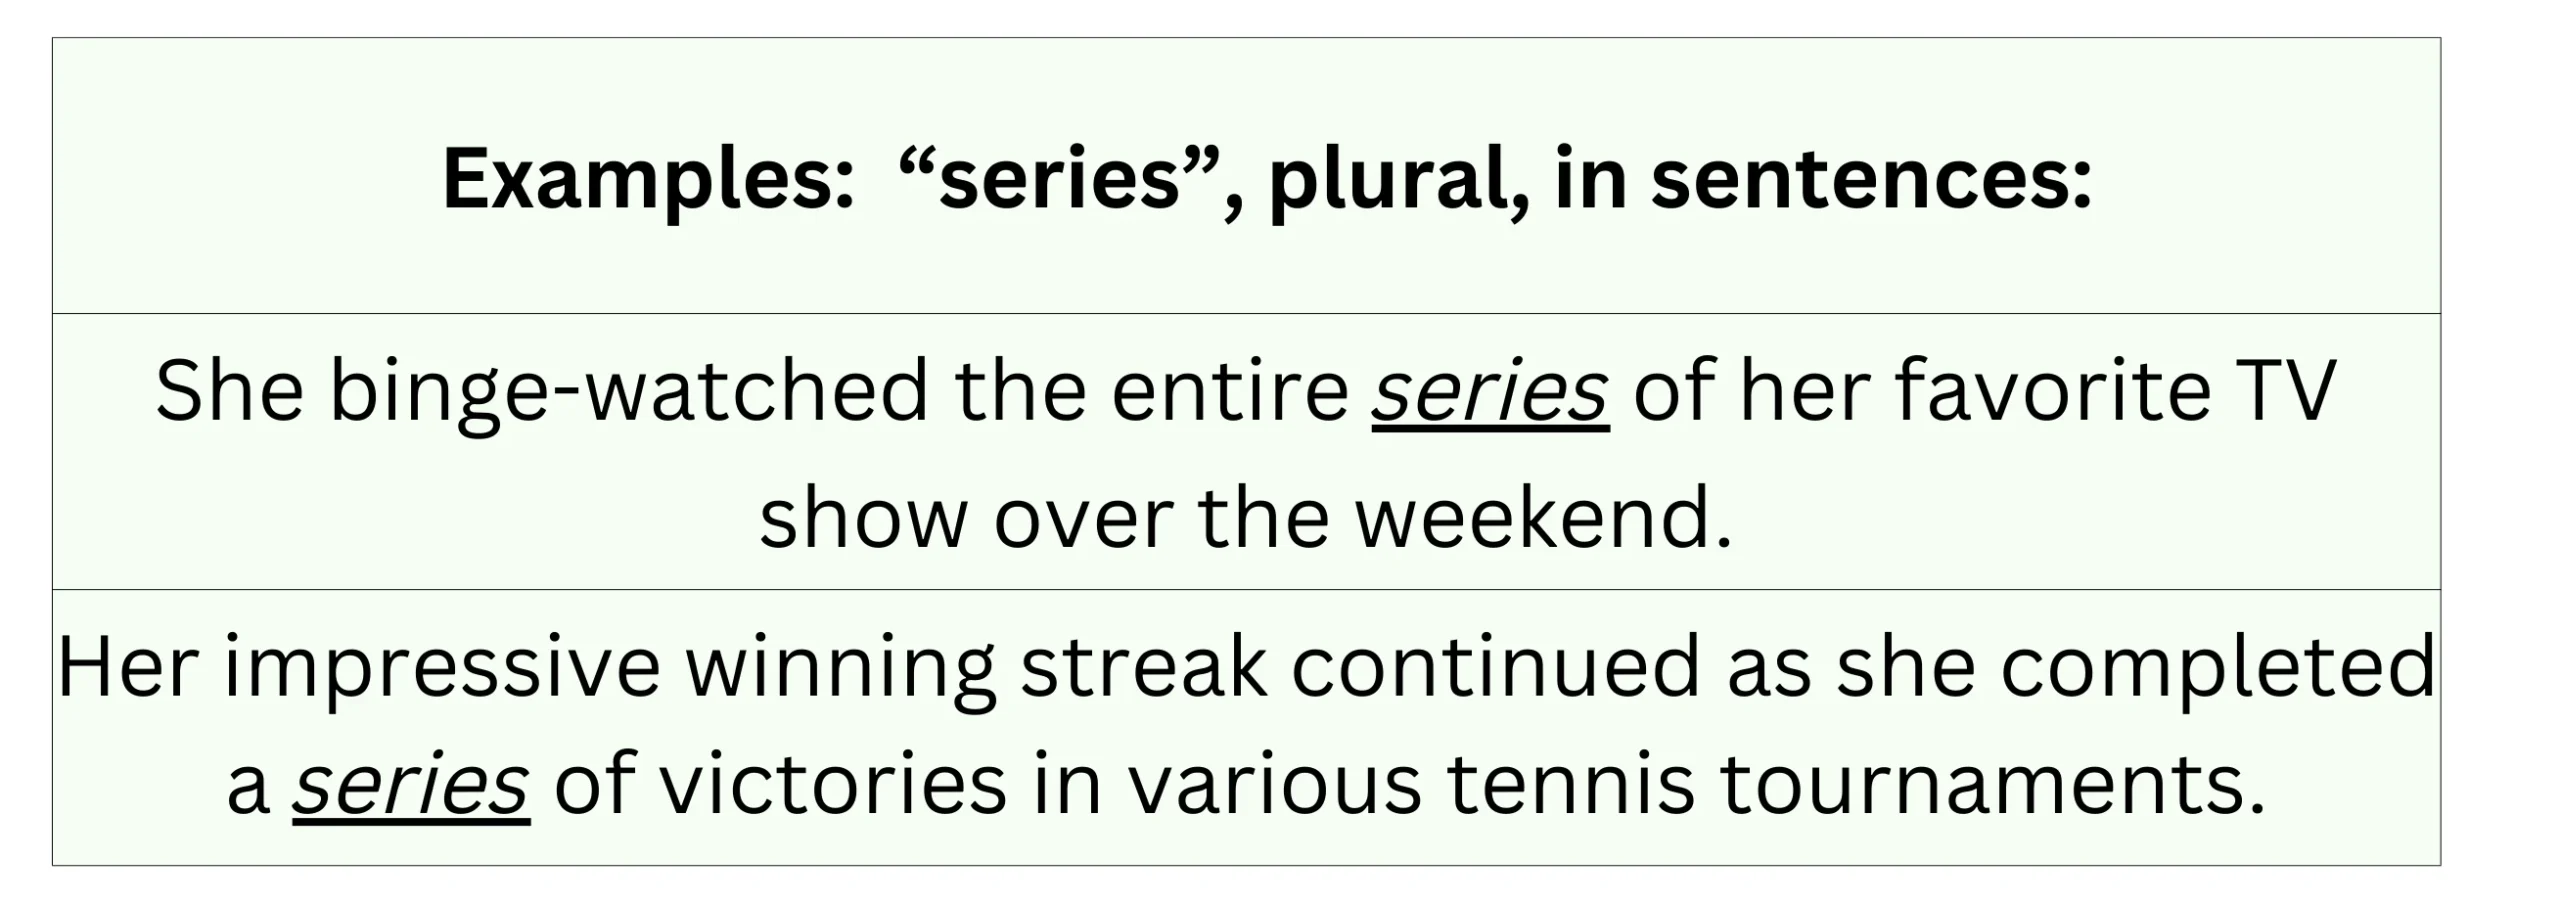 Examples of "series" in sentences.